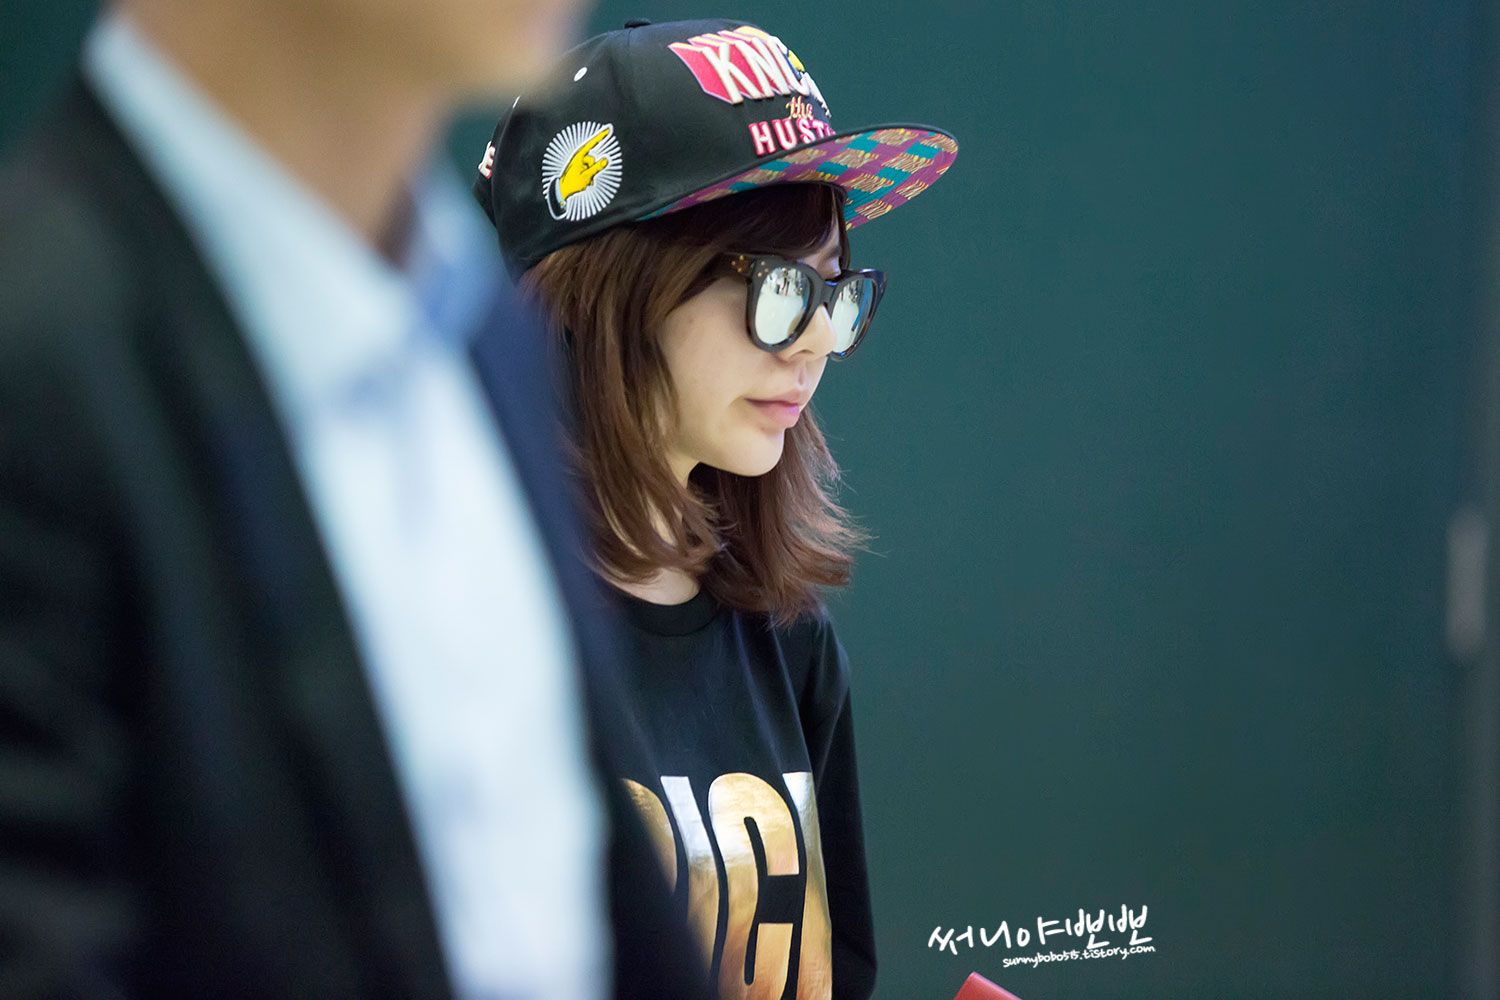 Sunny Incheon Airport to/from Hong Kong